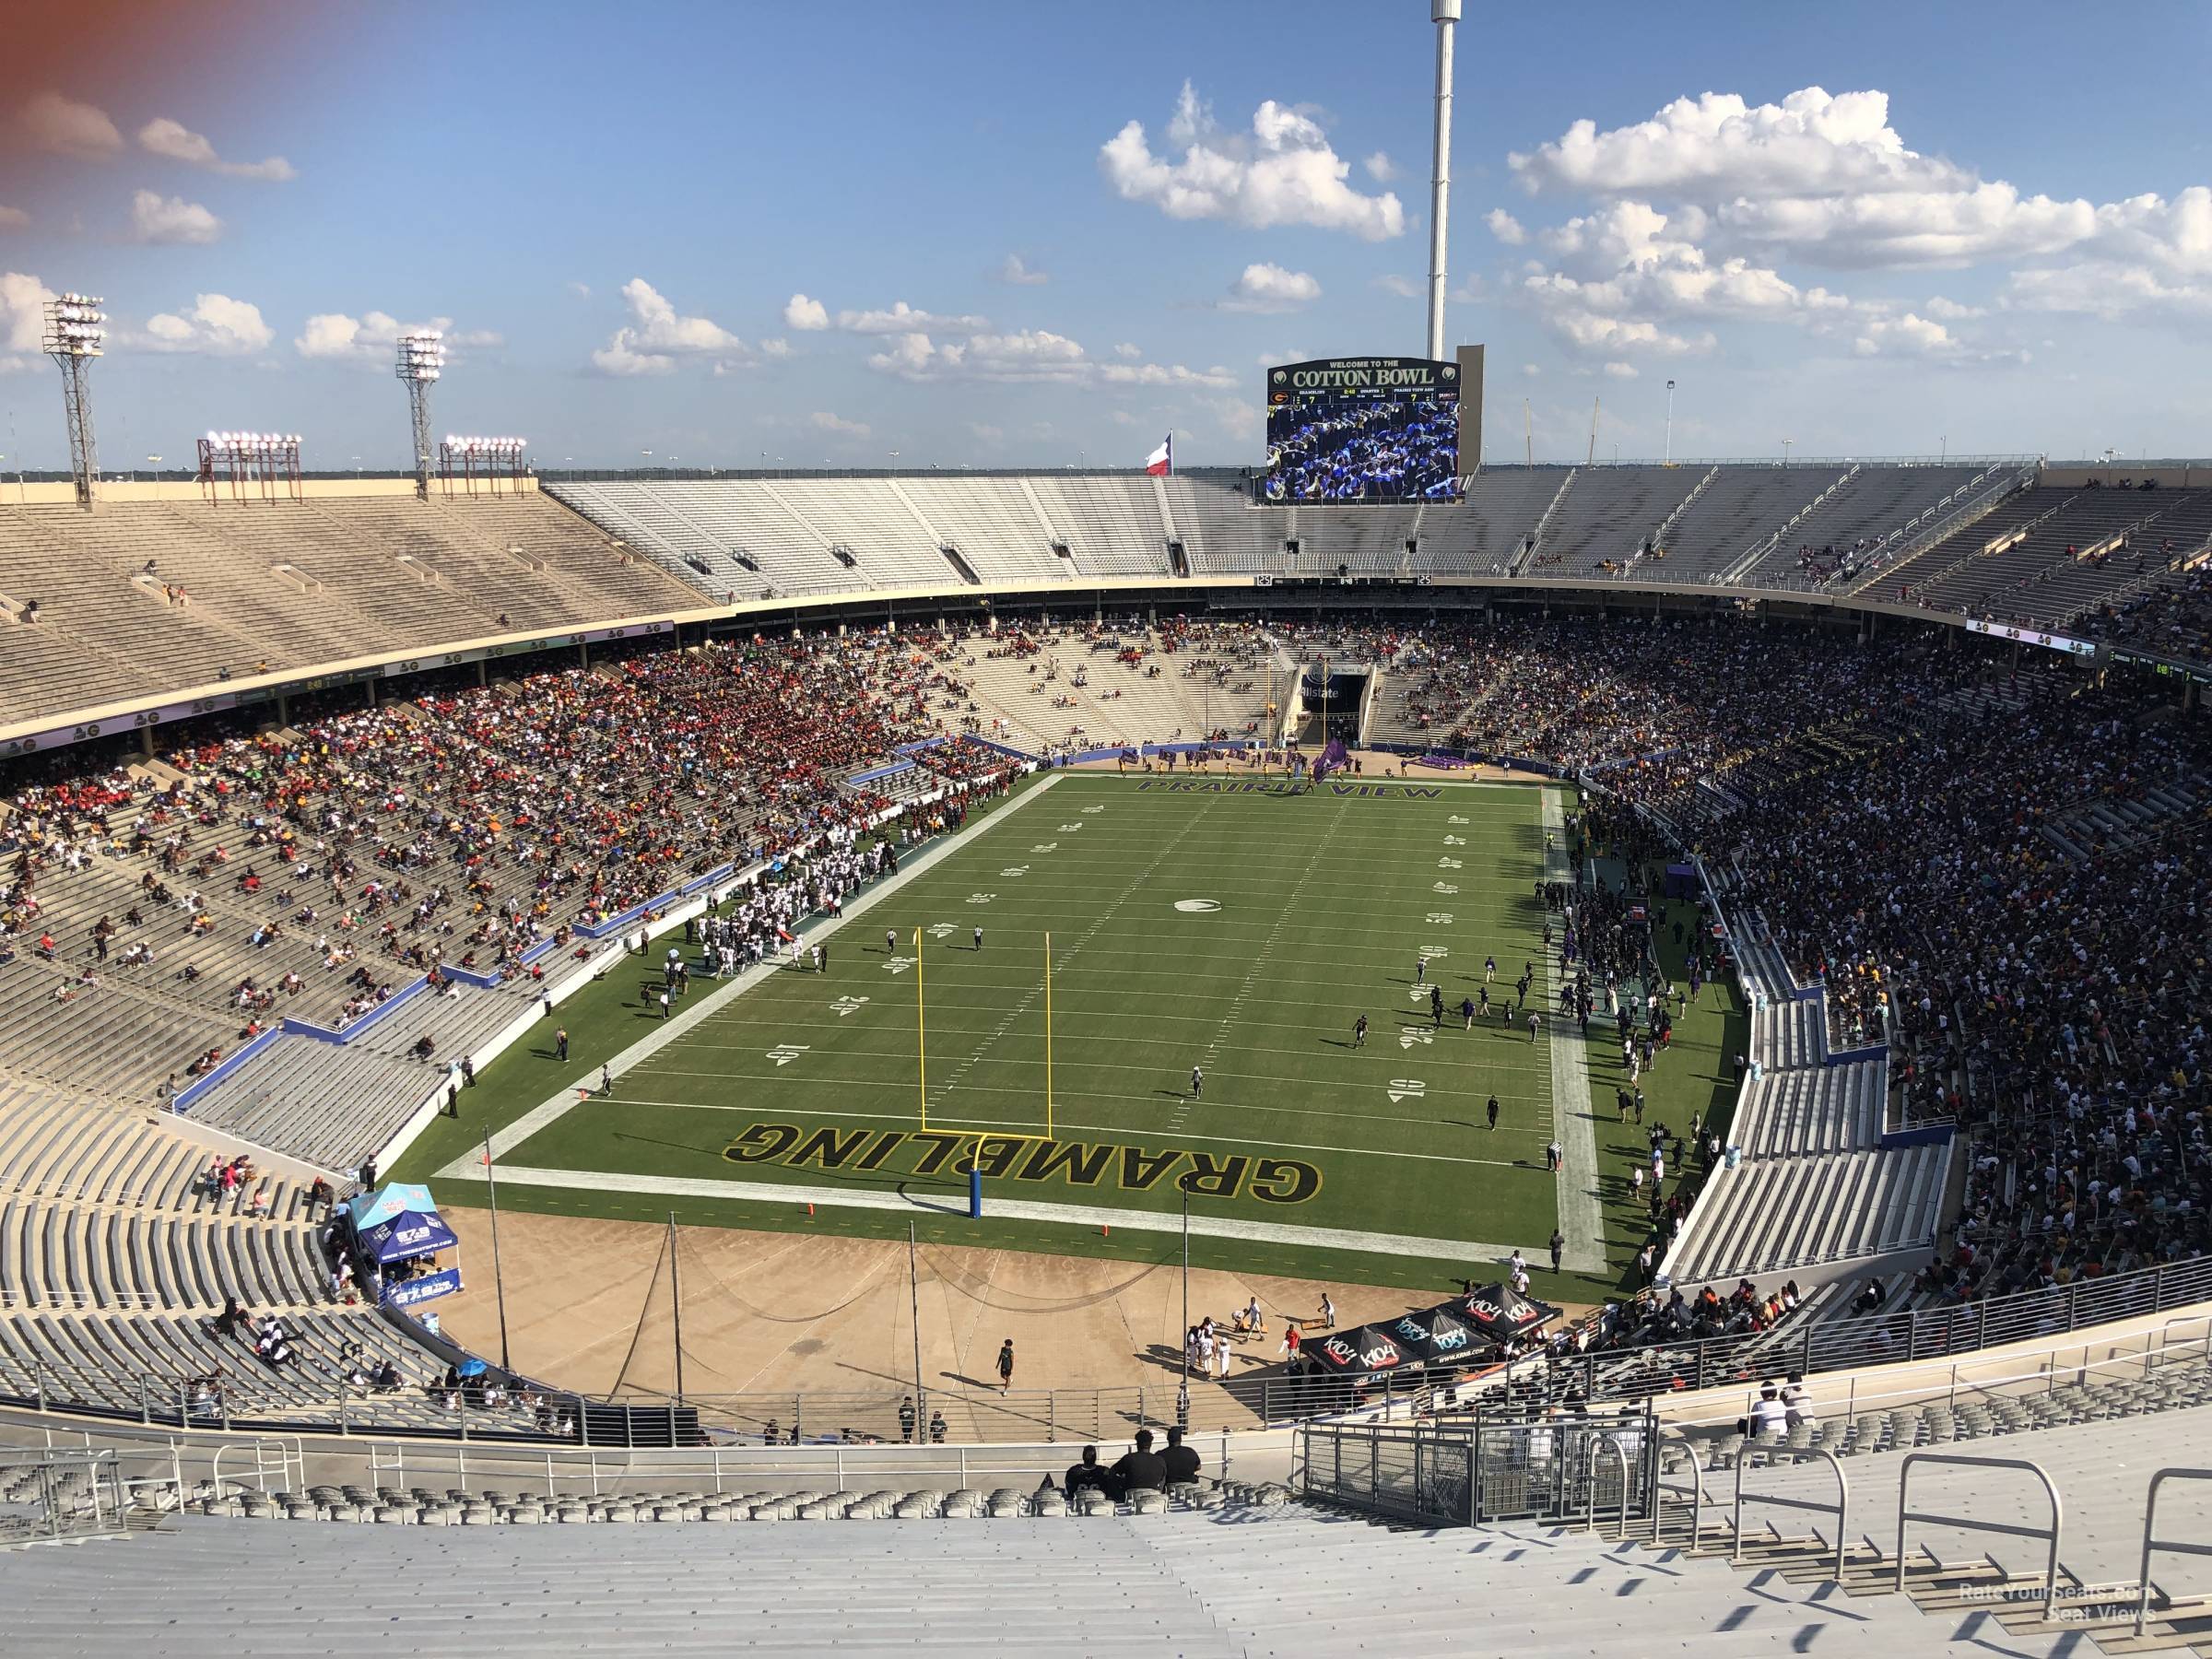 section 116, row 34 seat view  - cotton bowl